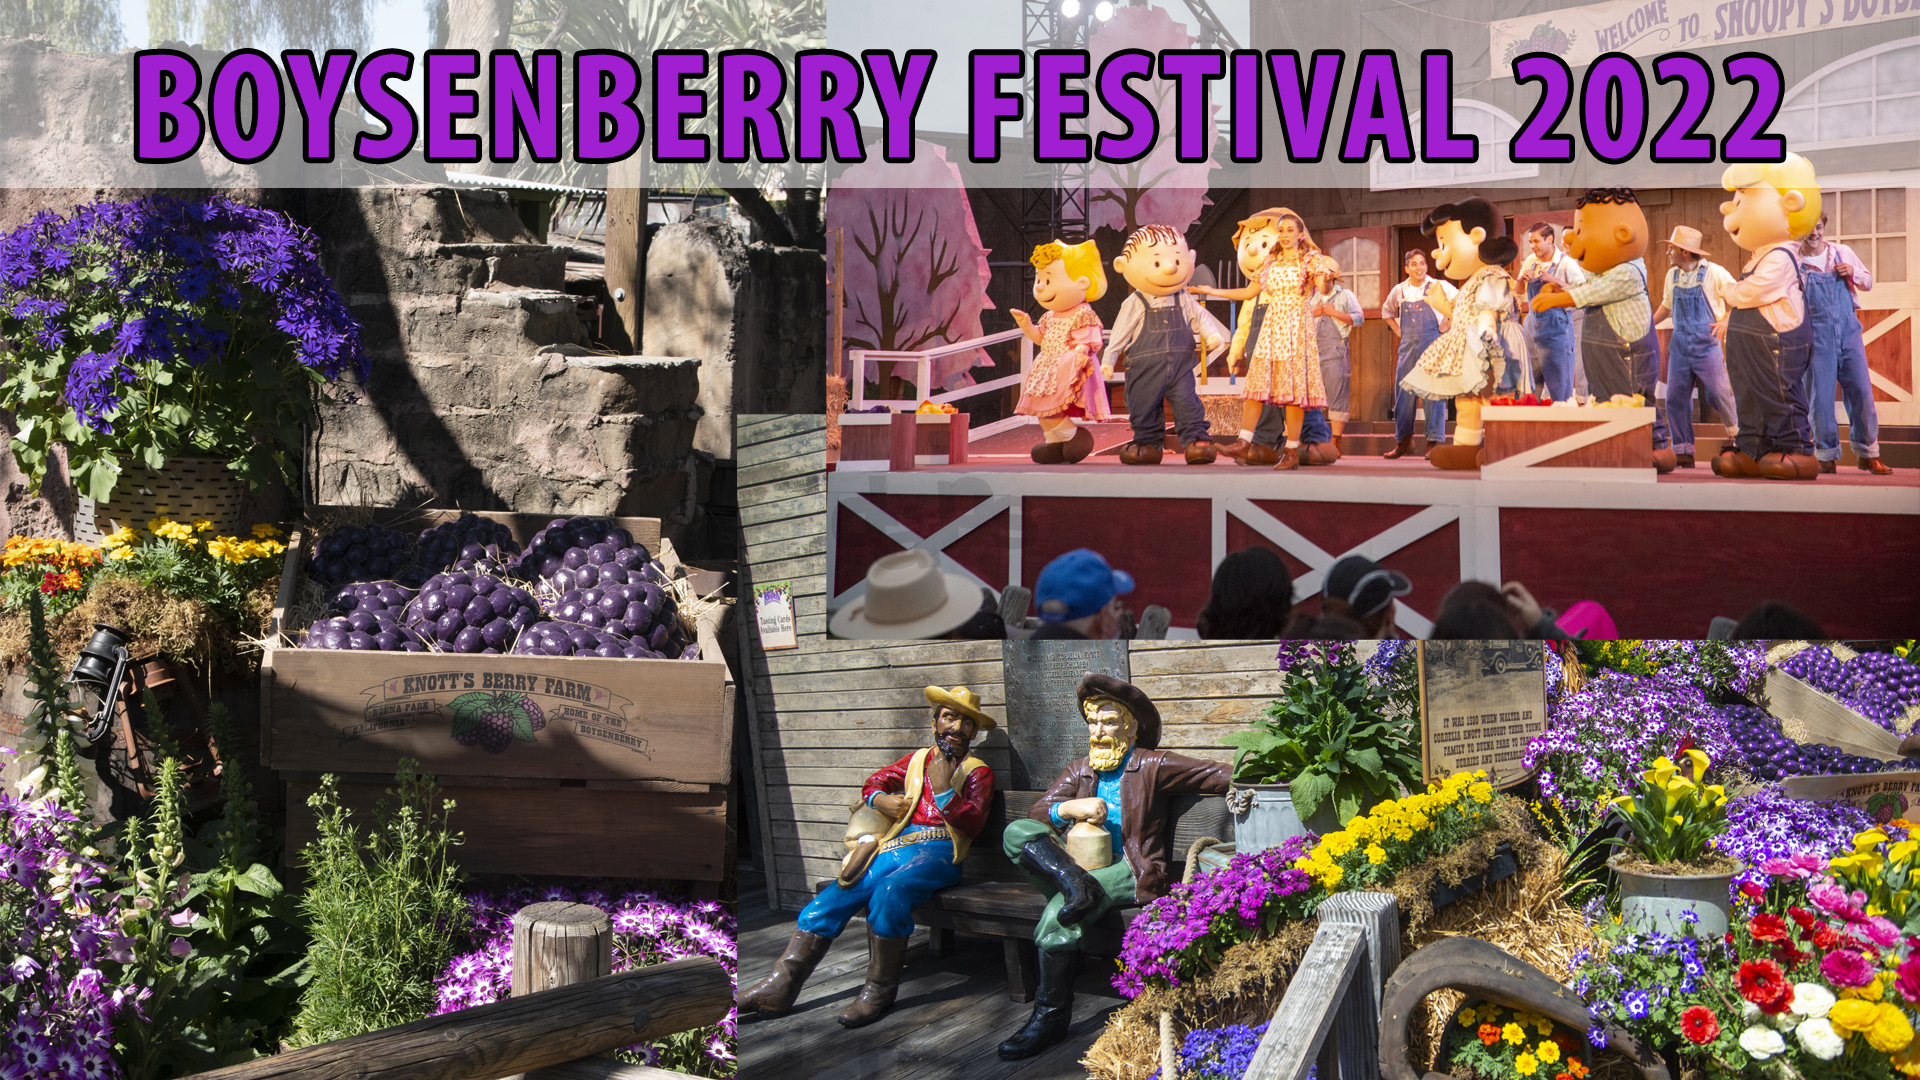 Knott’s Berry Farm’s Boysenberry Festival Returns to Sweet Tastes and Sights for 2022